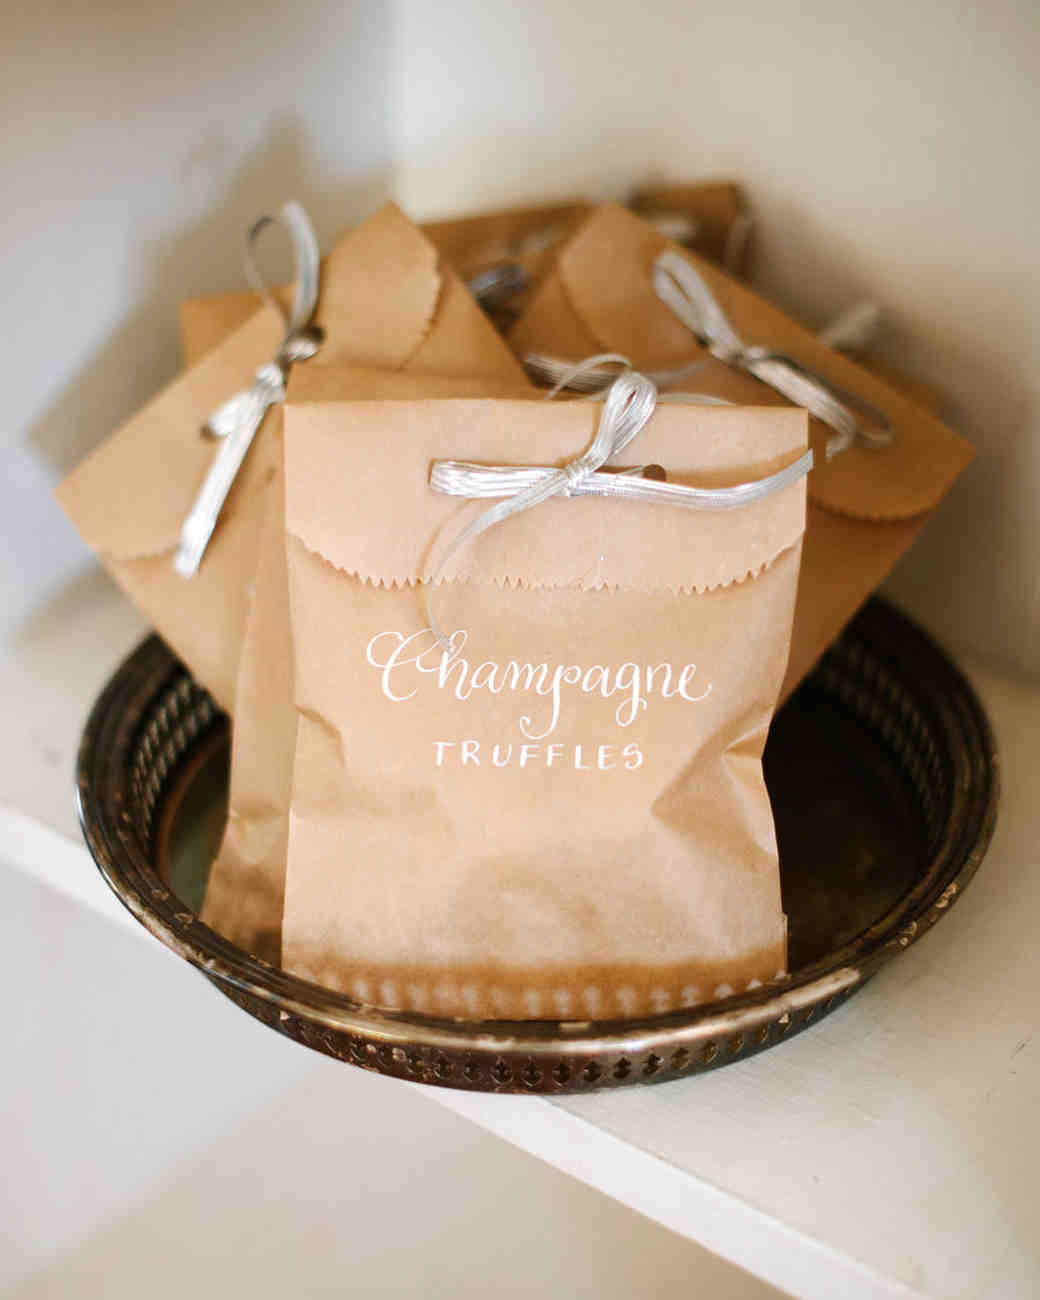 Engagement Party Favor Ideas
 How to Plan the Ultimate Engagement Party